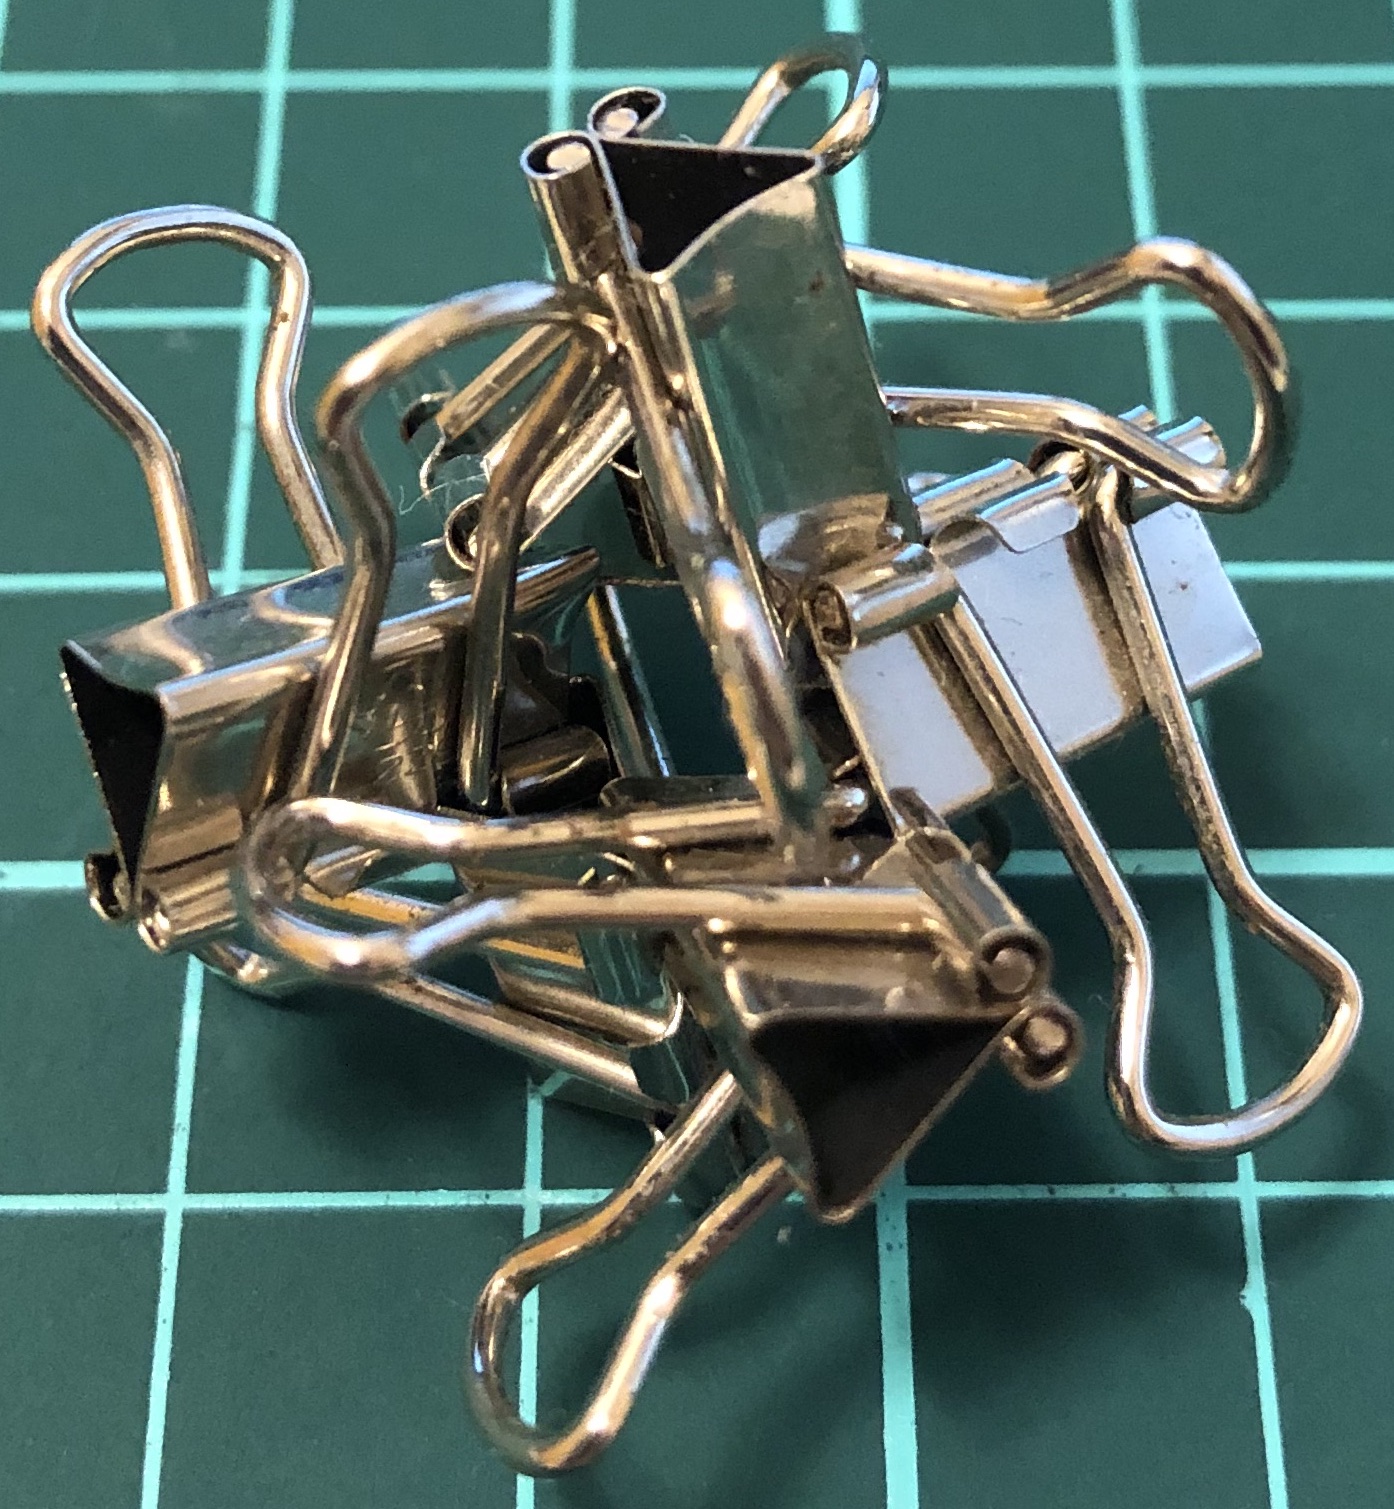 6 binder clips forming a cycle